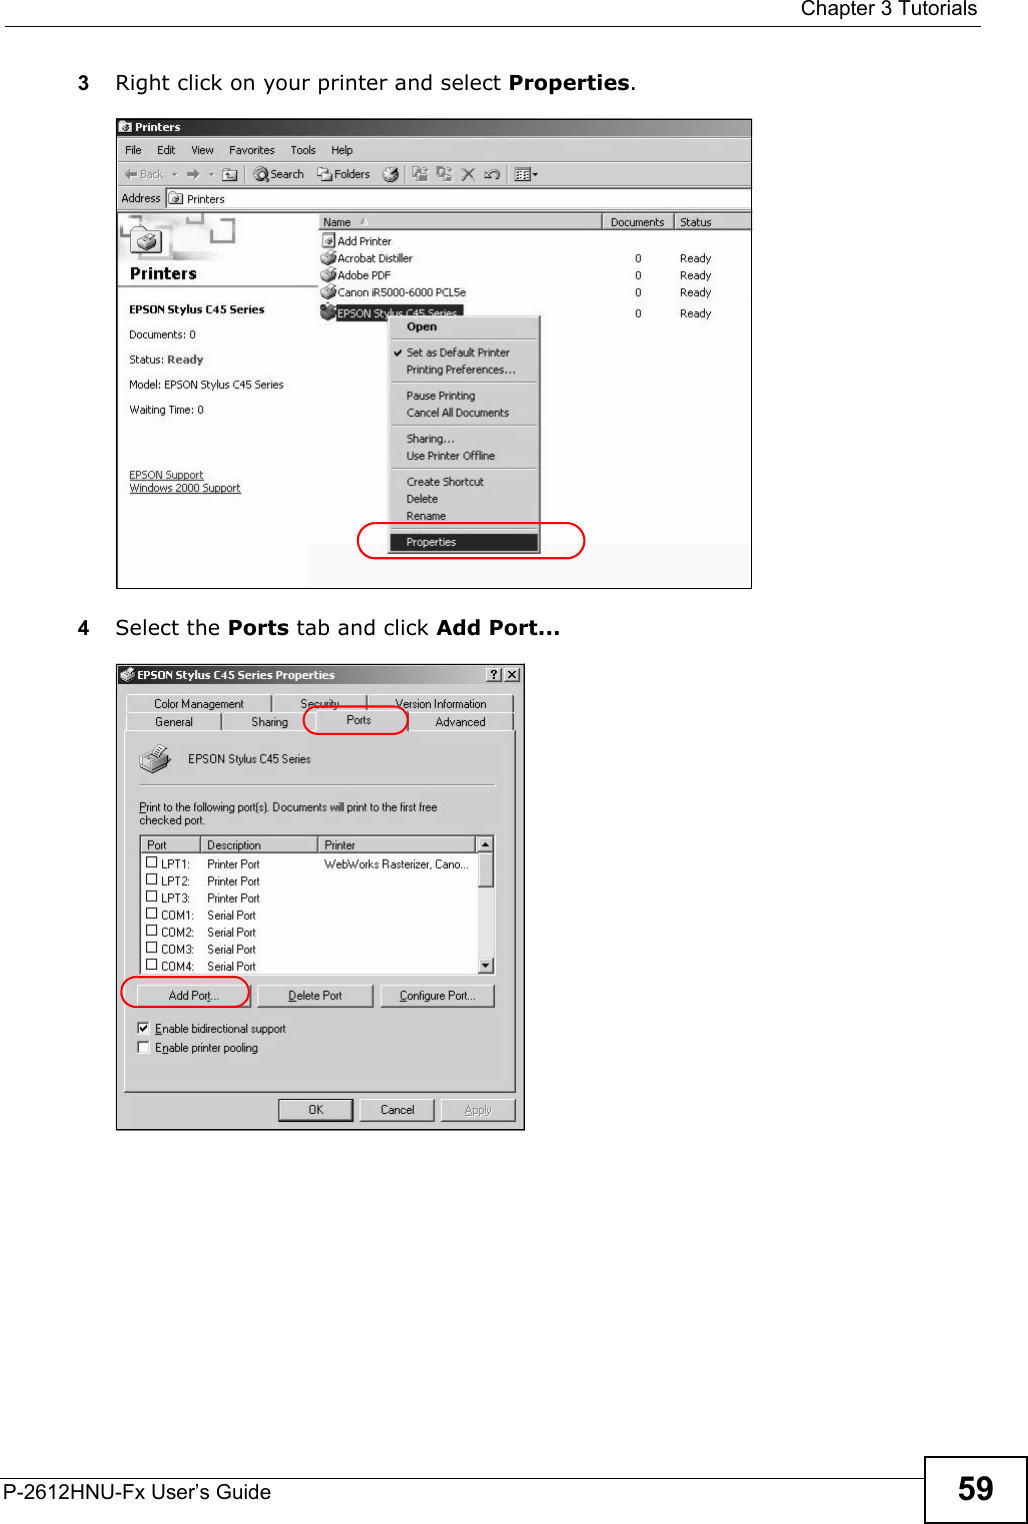  Chapter 3 TutorialsP-2612HNU-Fx User’s Guide 593Right click on your printer and select Properties.Tutorial: Open Printer Properties4Select the Ports tab and click Add Port...Tutorial: Printer Properties Window